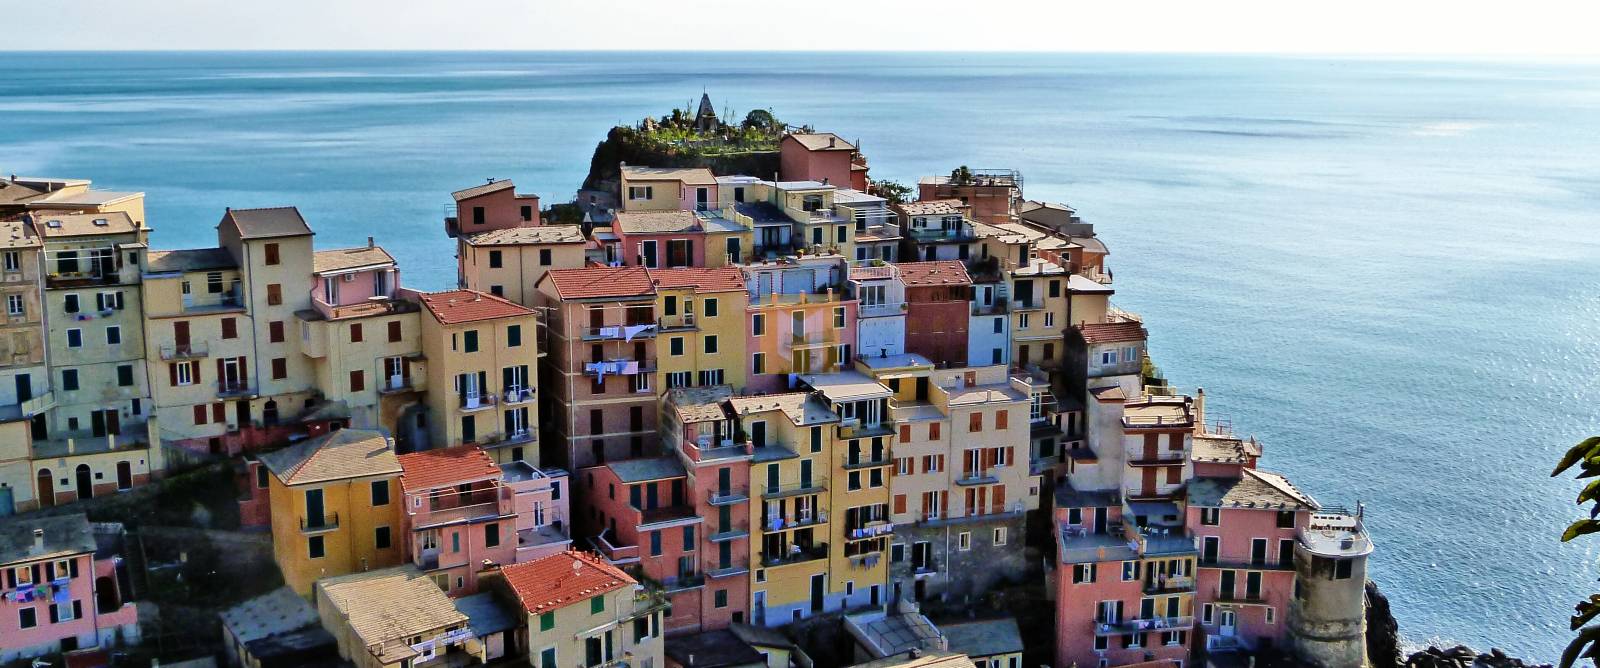 Top 10 things to see and do in the Italian Riviera